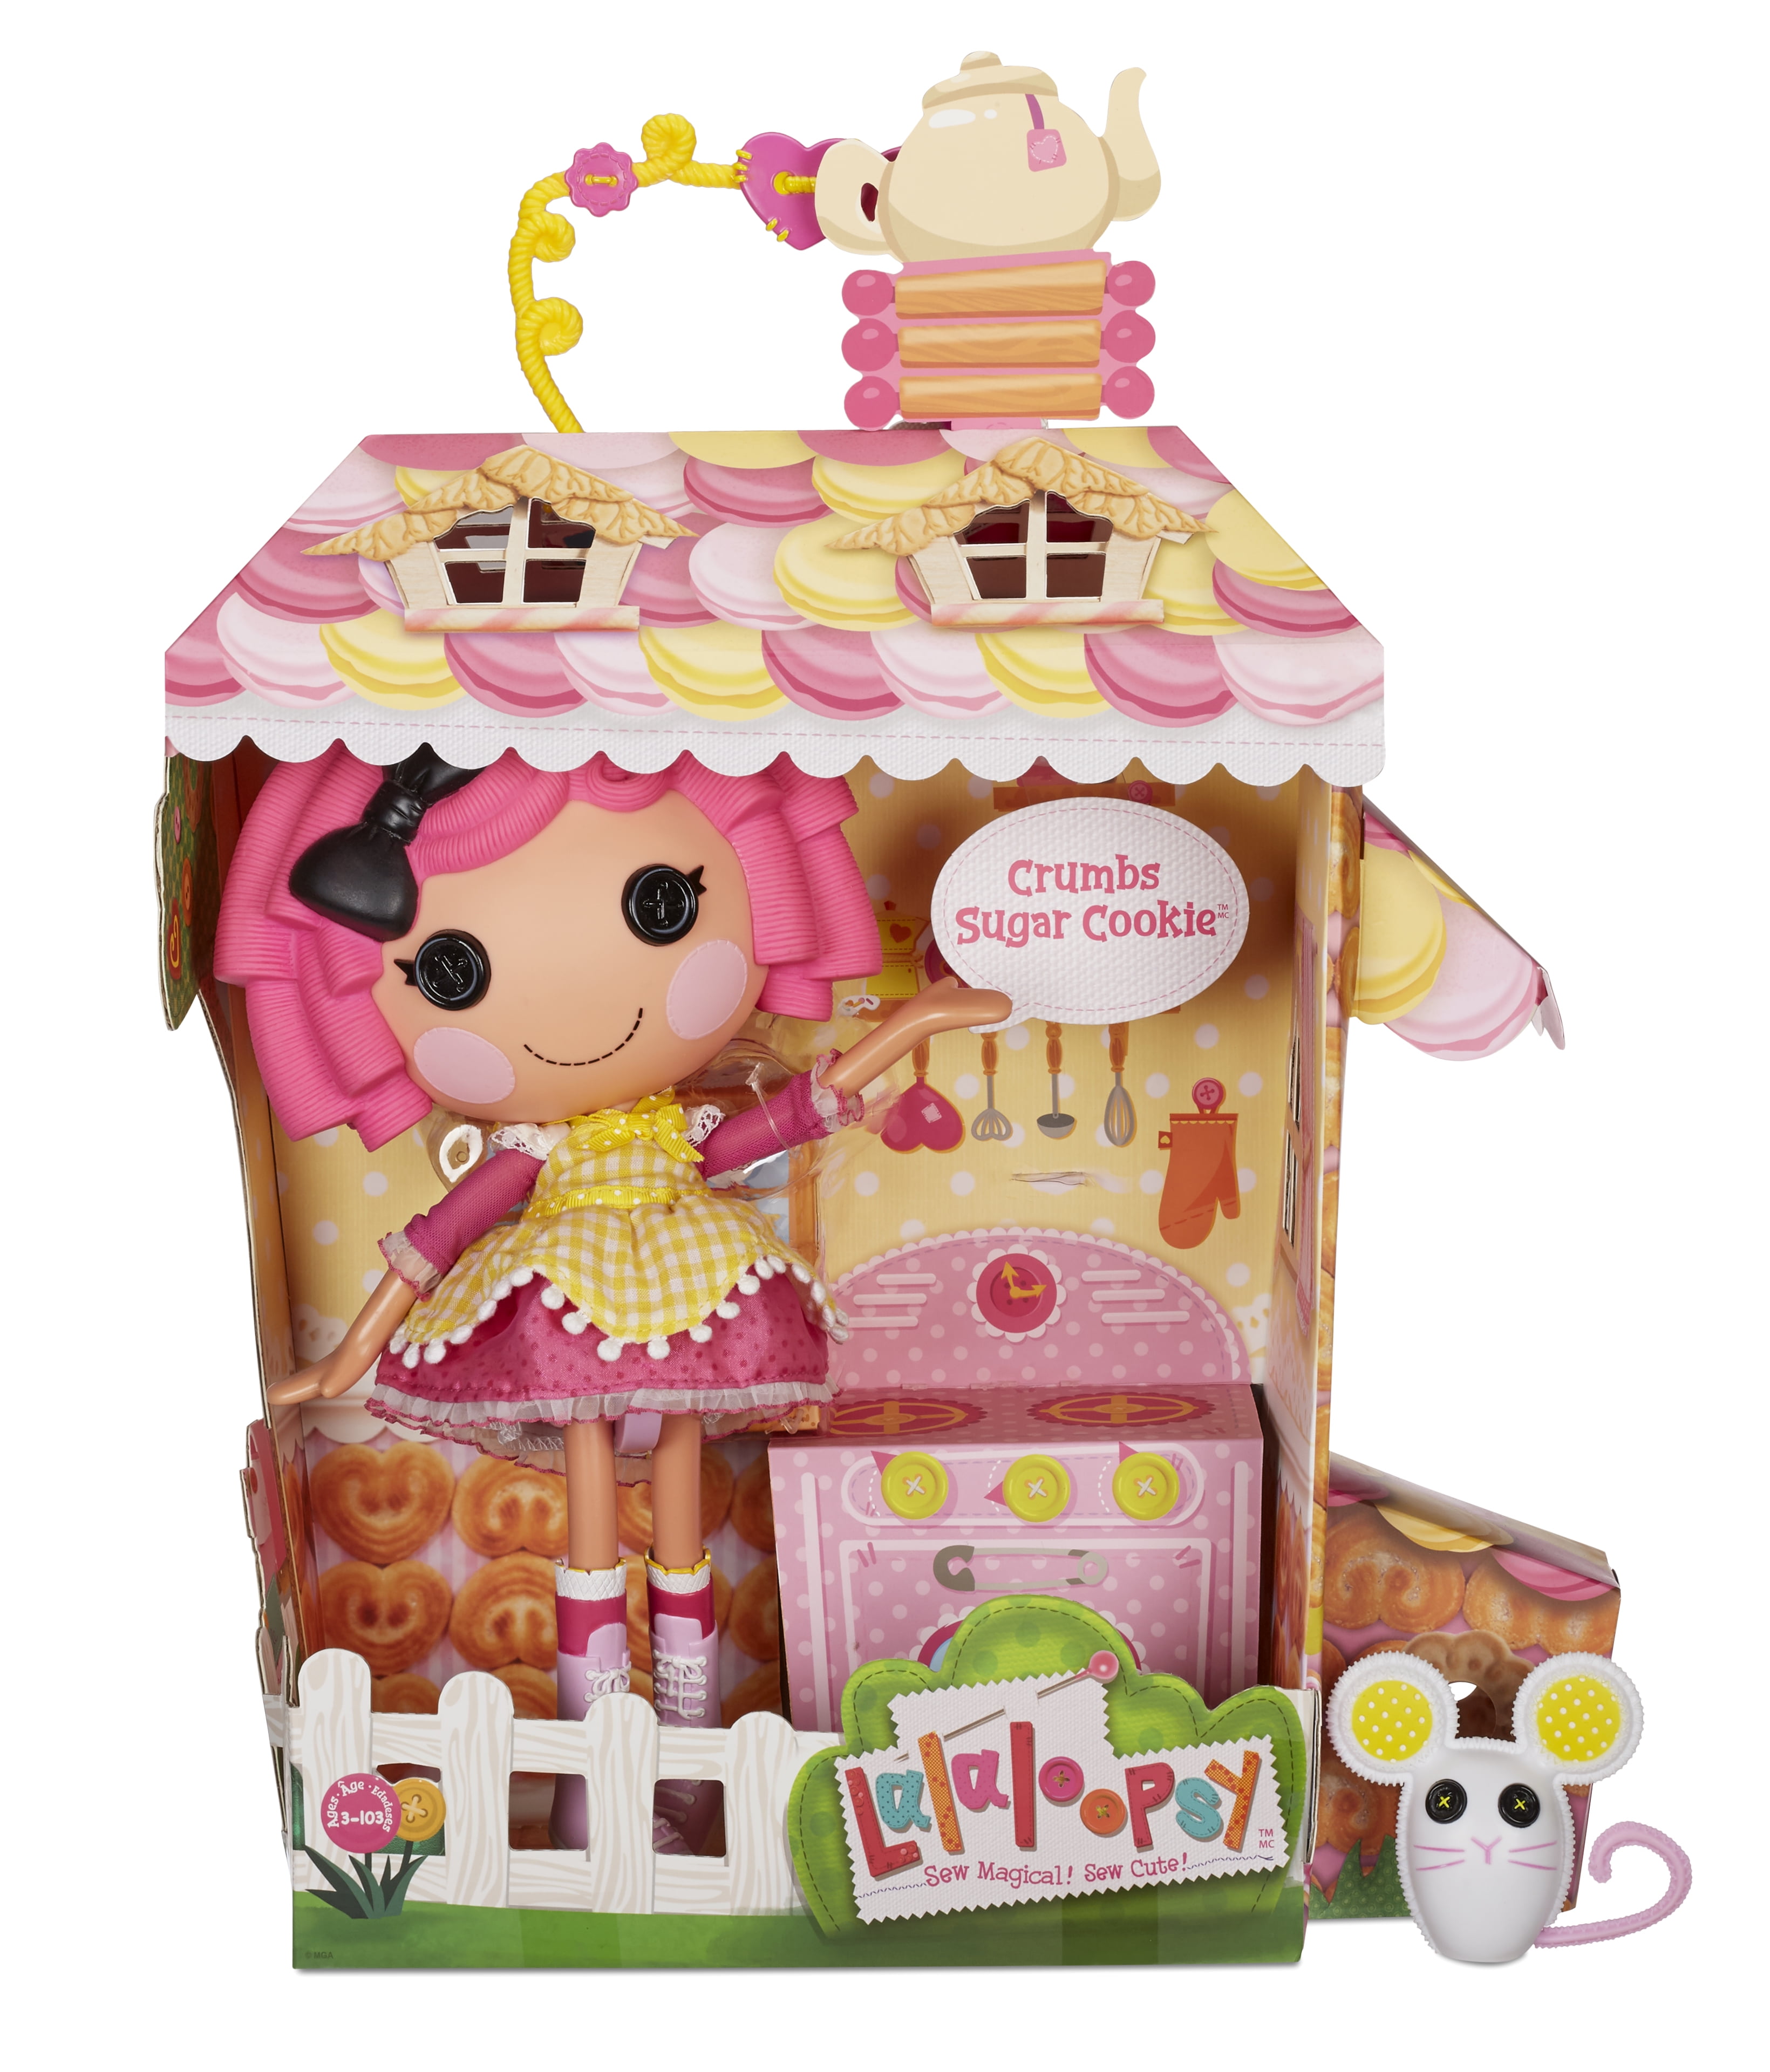 in Reusable House Package playset 13 Baker Doll with Changeable Pink and Yellow Outfit and Shoes for Ages 3-103 Multicolor Crumbs Sugar Cookie with Pet Mouse Lalaloopsy Doll 